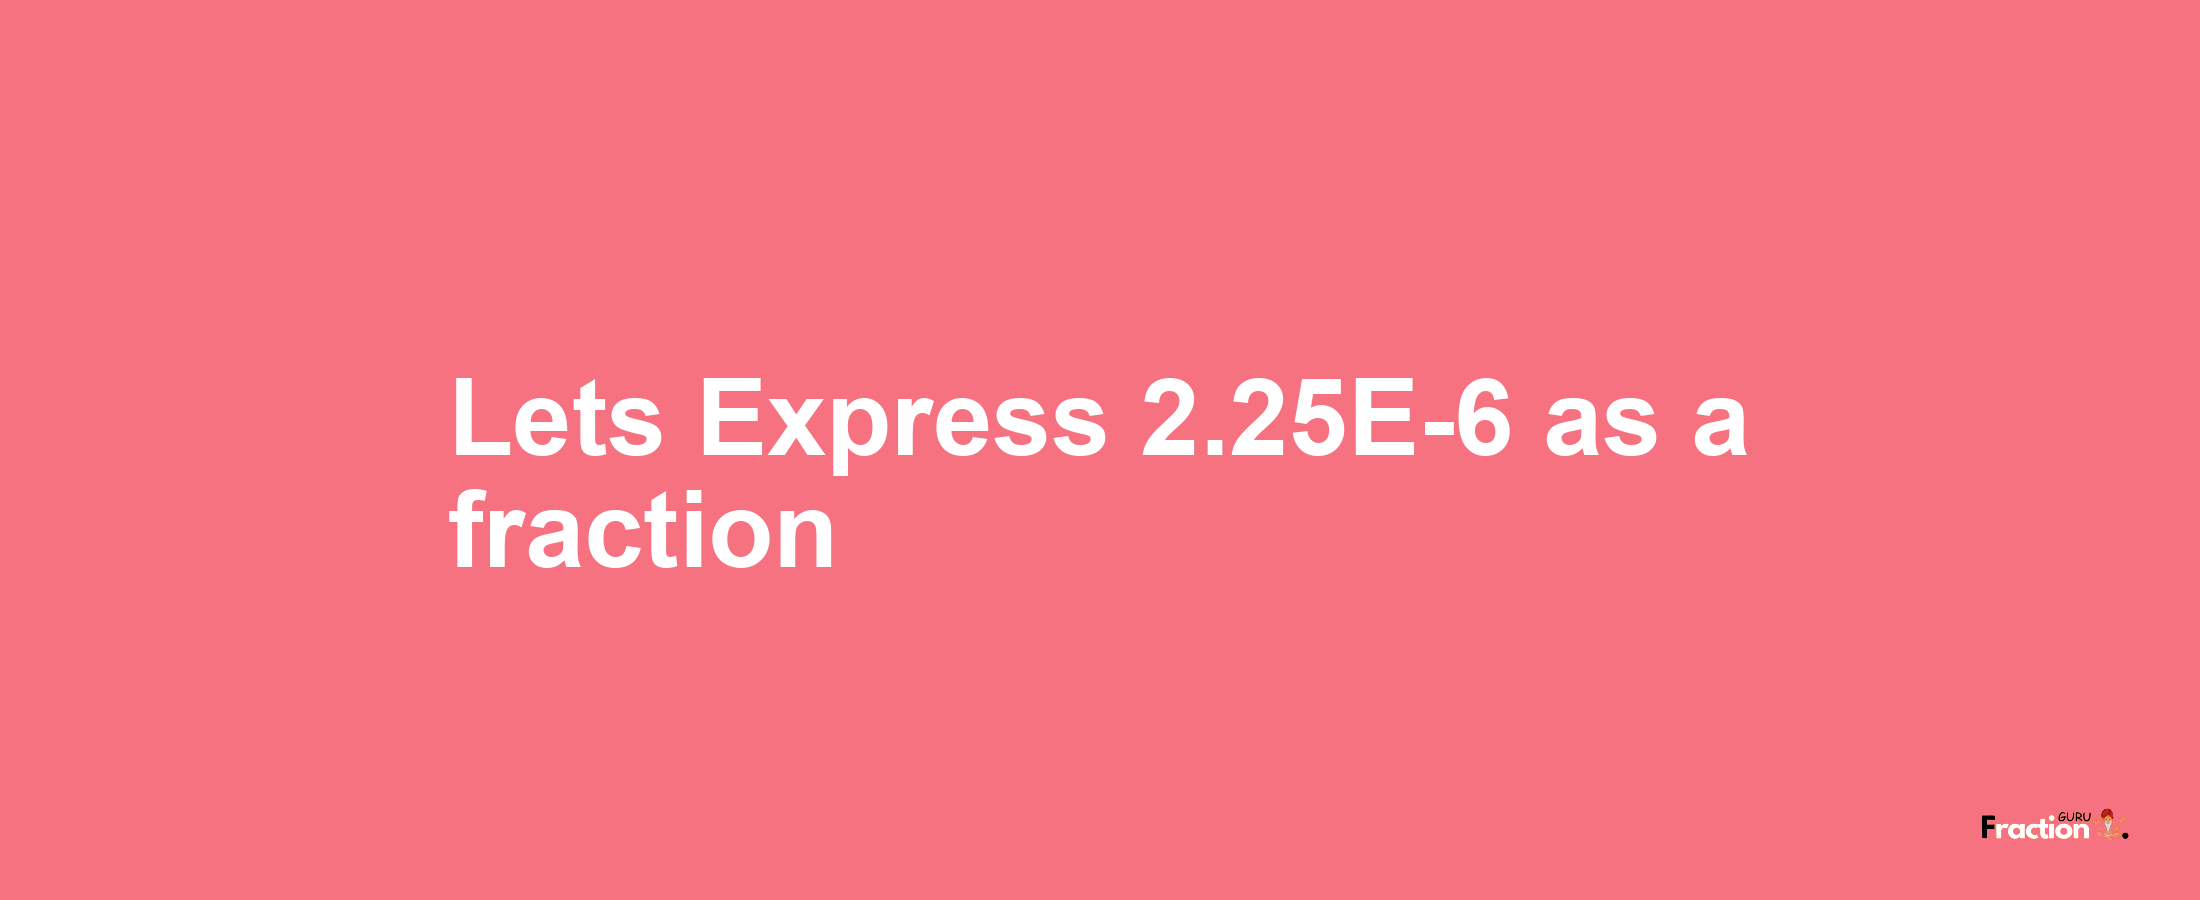 Lets Express 2.25E-6 as afraction